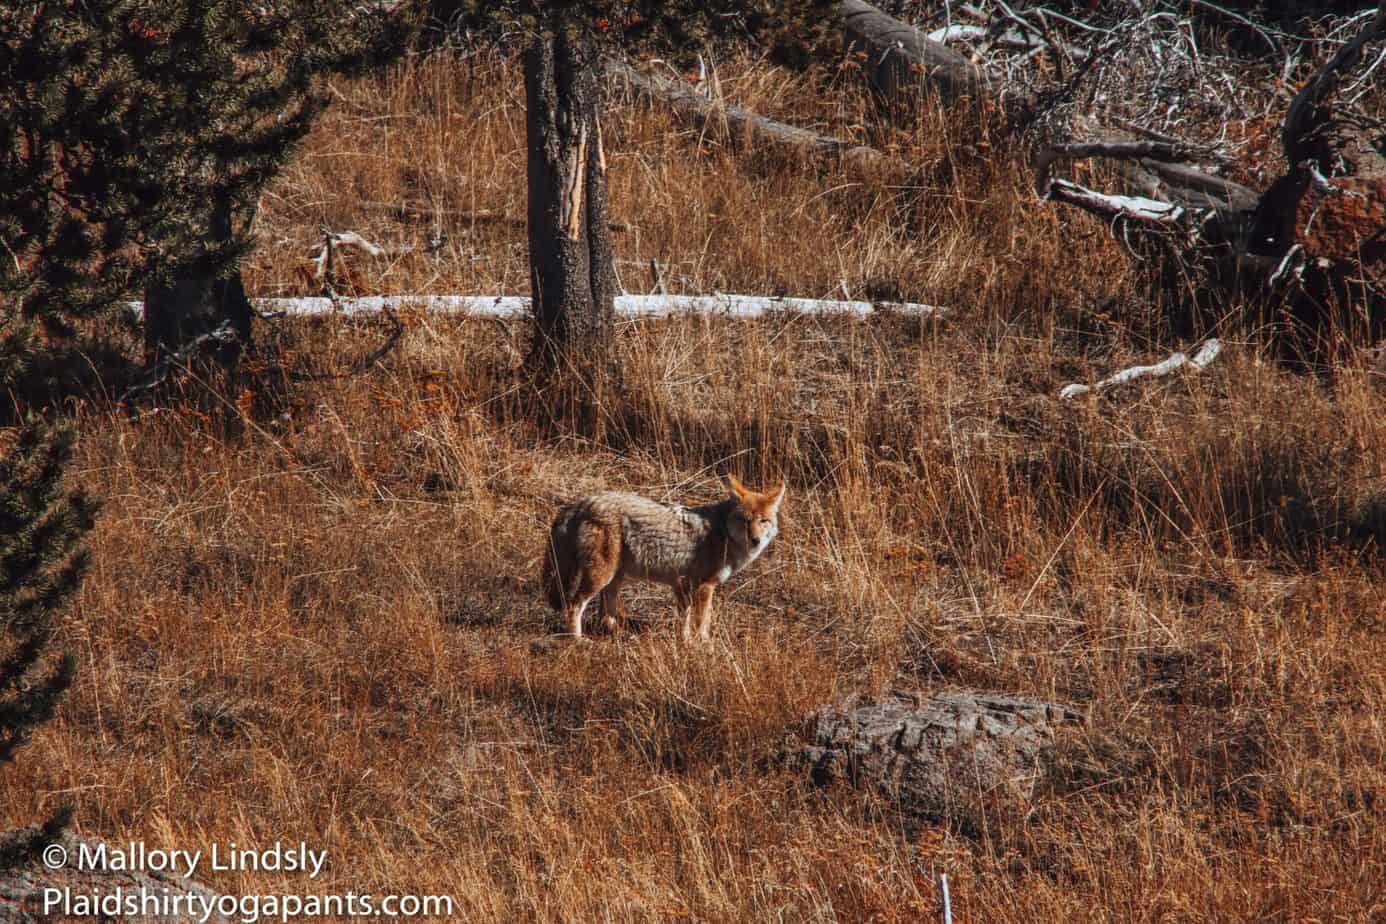 Long lens photo of a coyote looking at the camera